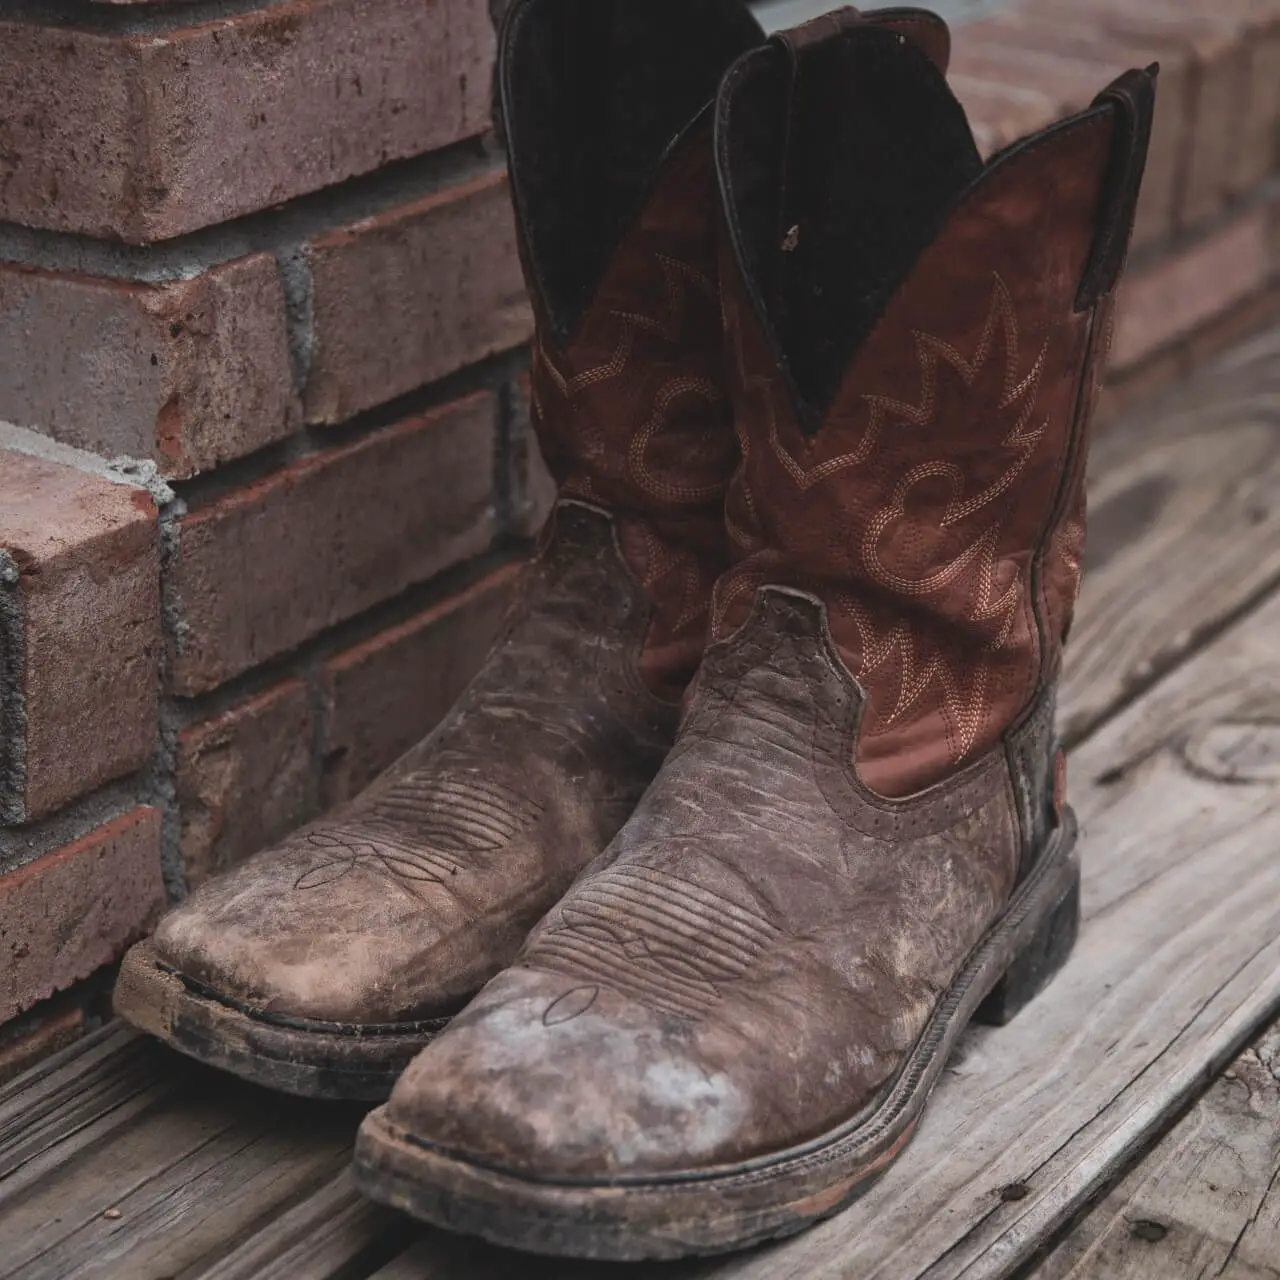 Pair of old cowboy boots sitting on a wooden bench next to red brick wall